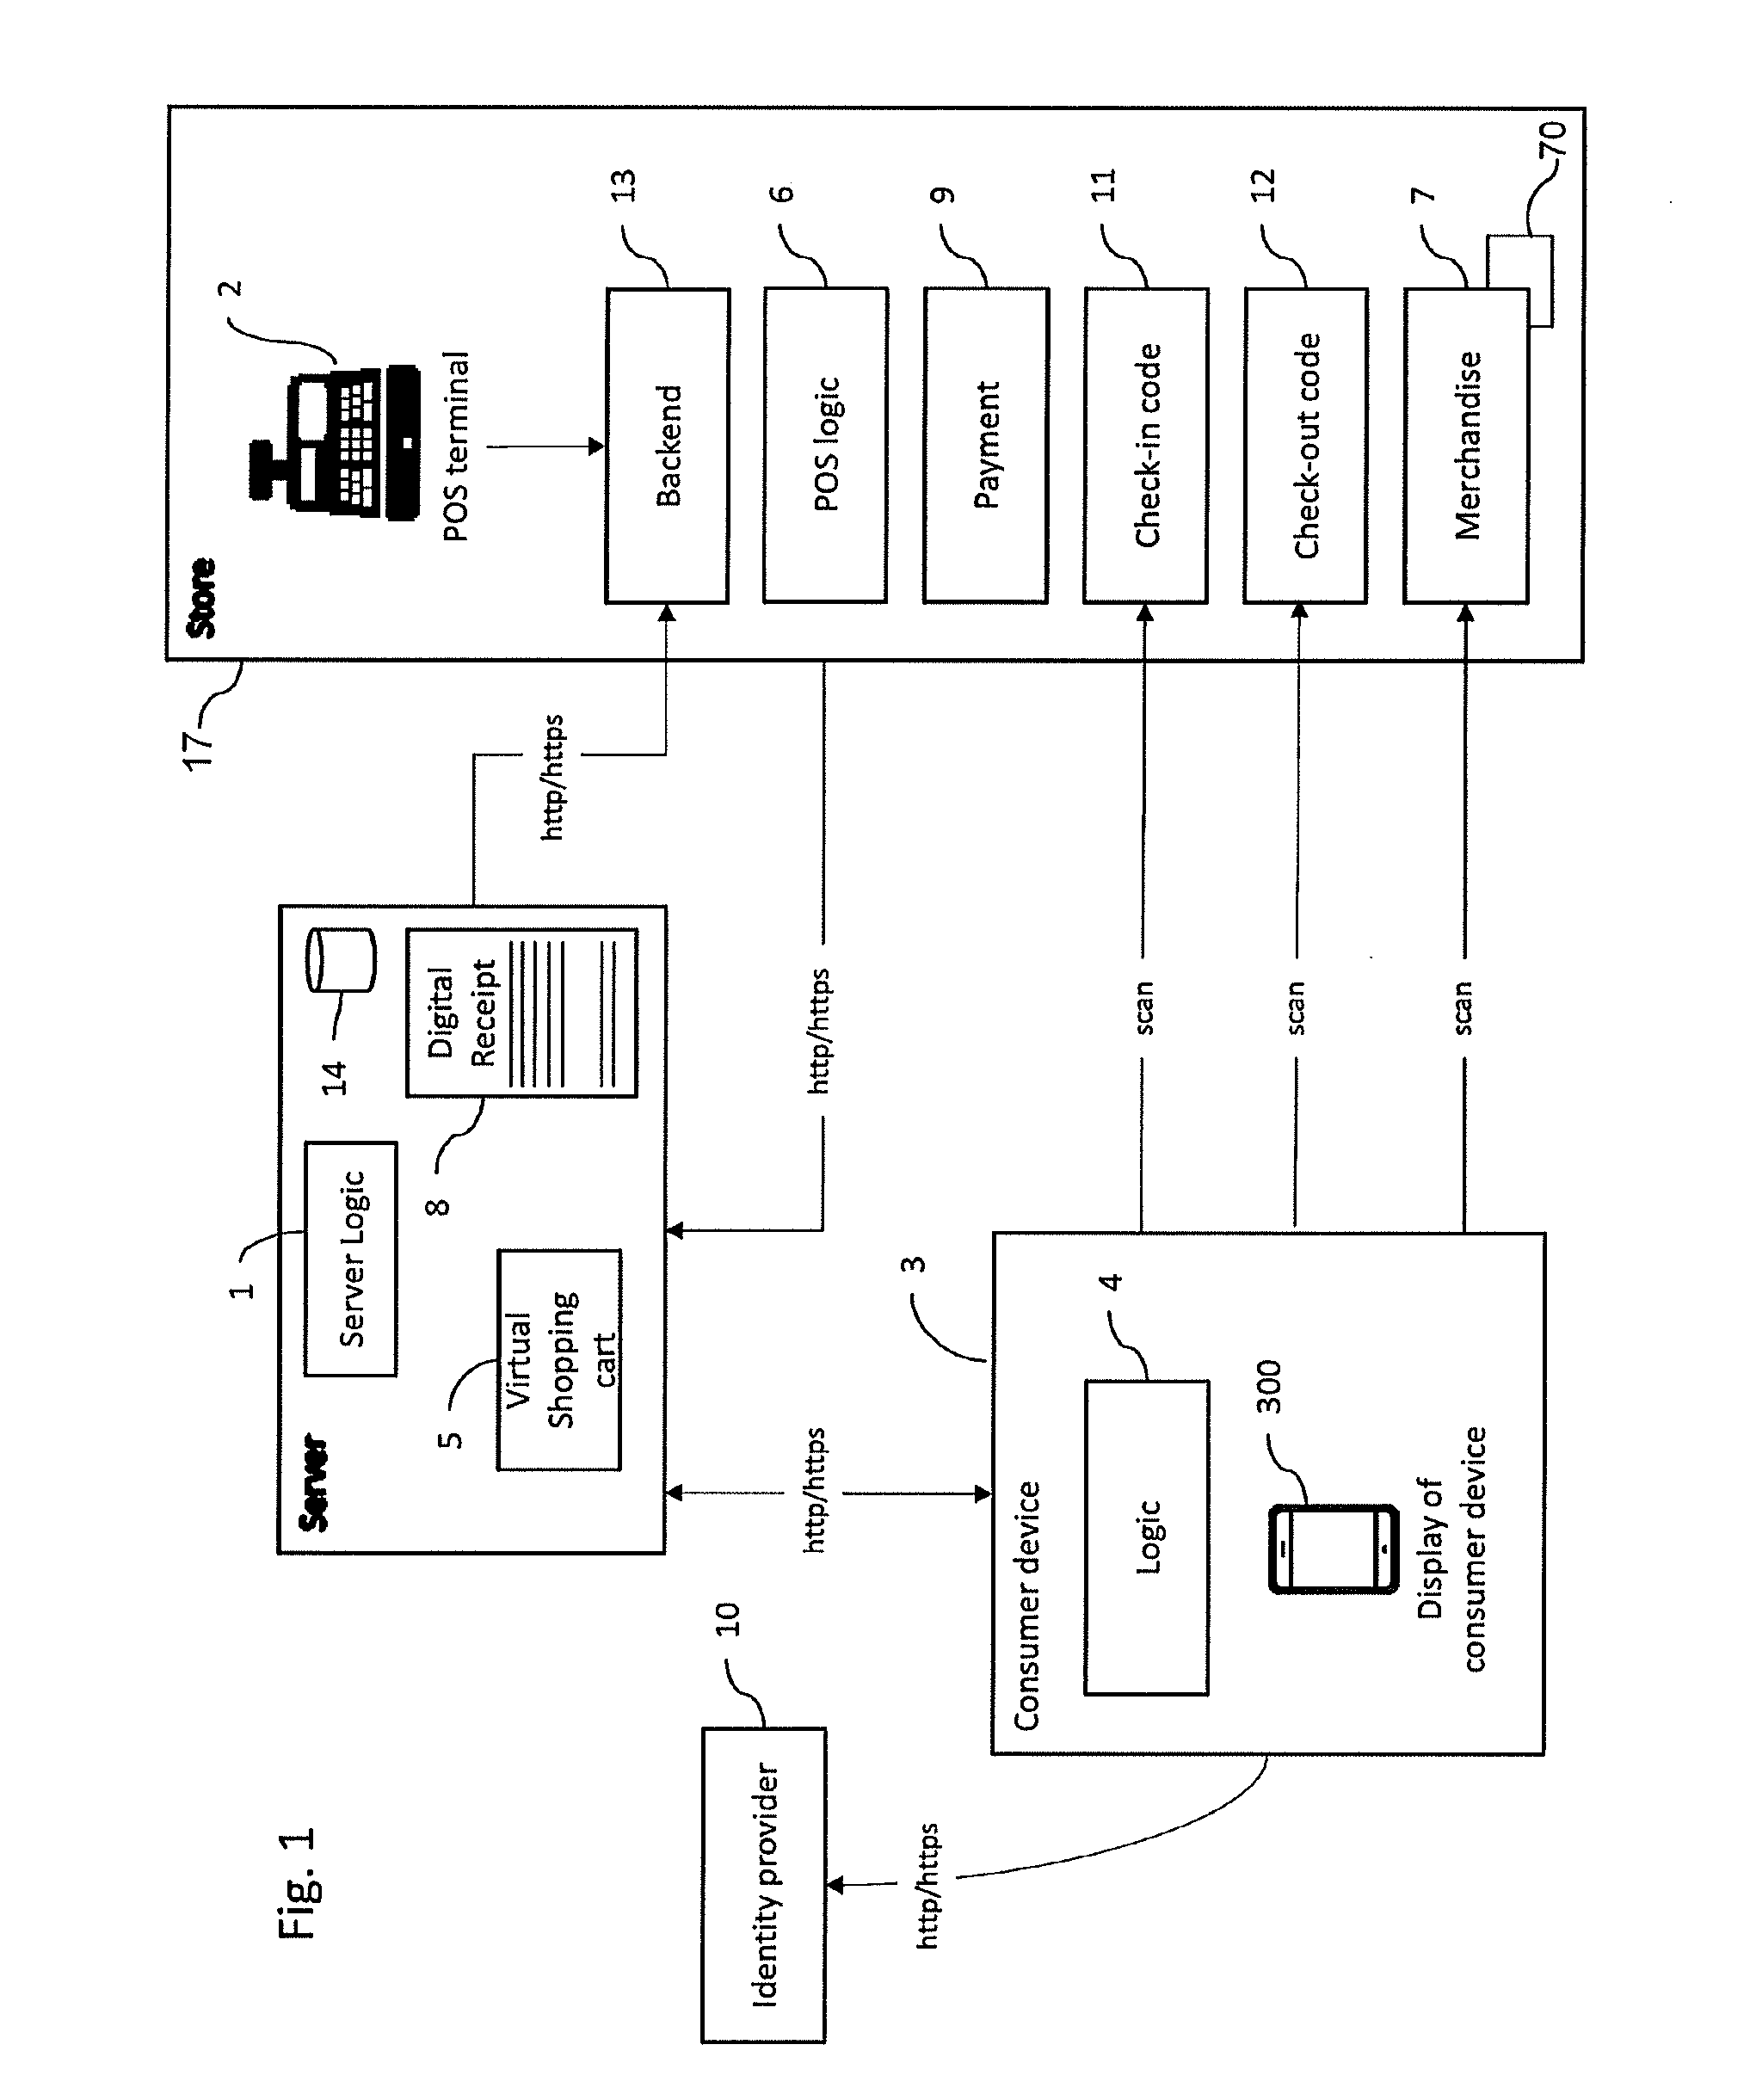 Payment system and method including enabling electronic receipts